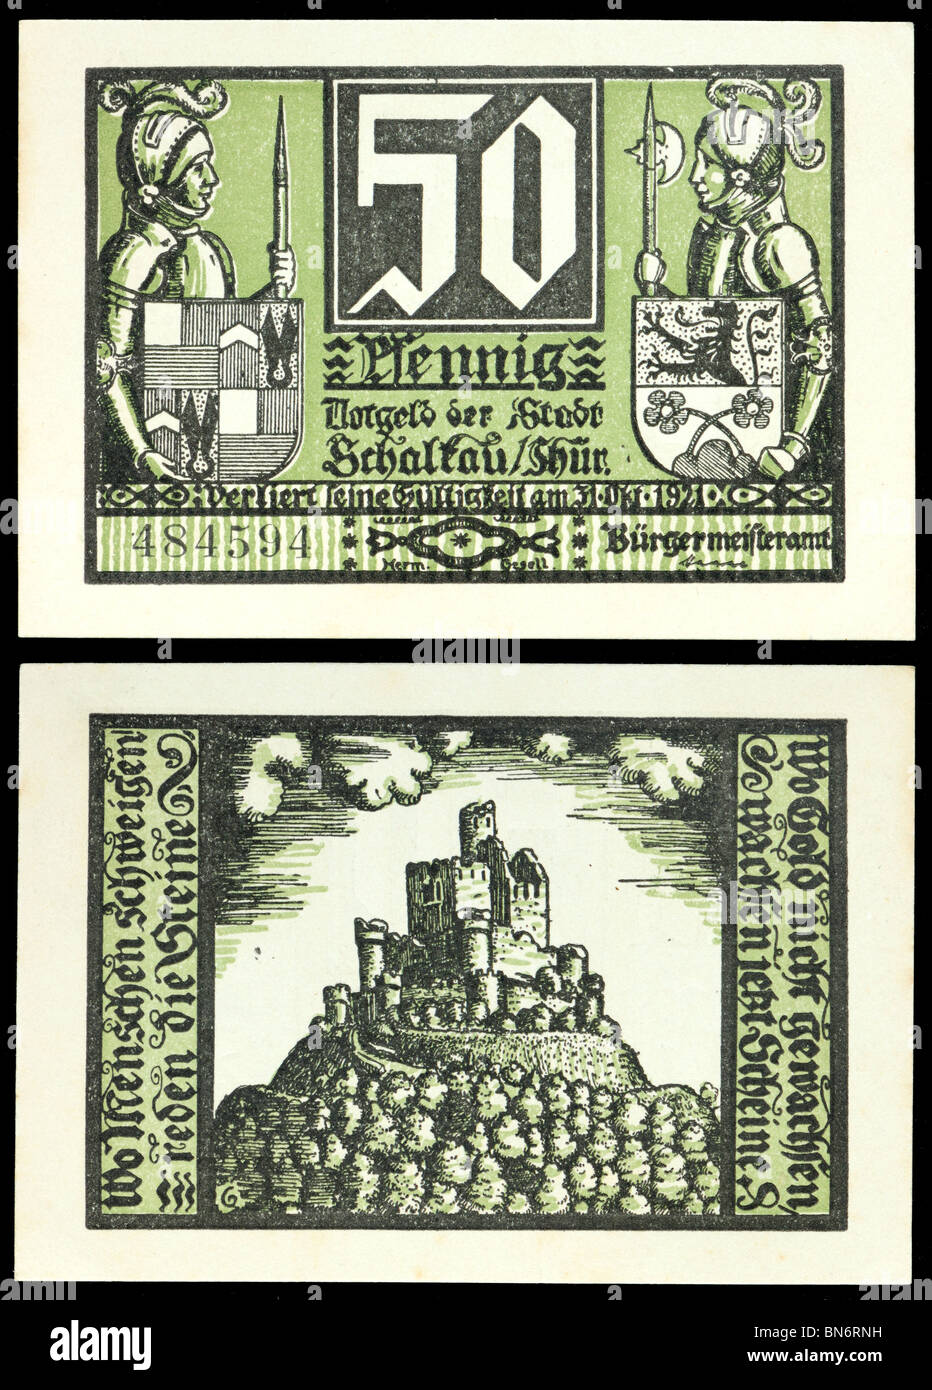 German Notgeld (emergency money) from period of hyperinflation. Note valid to Oct. 1921. 50pf, from Schaltau / Thur. Stock Photo